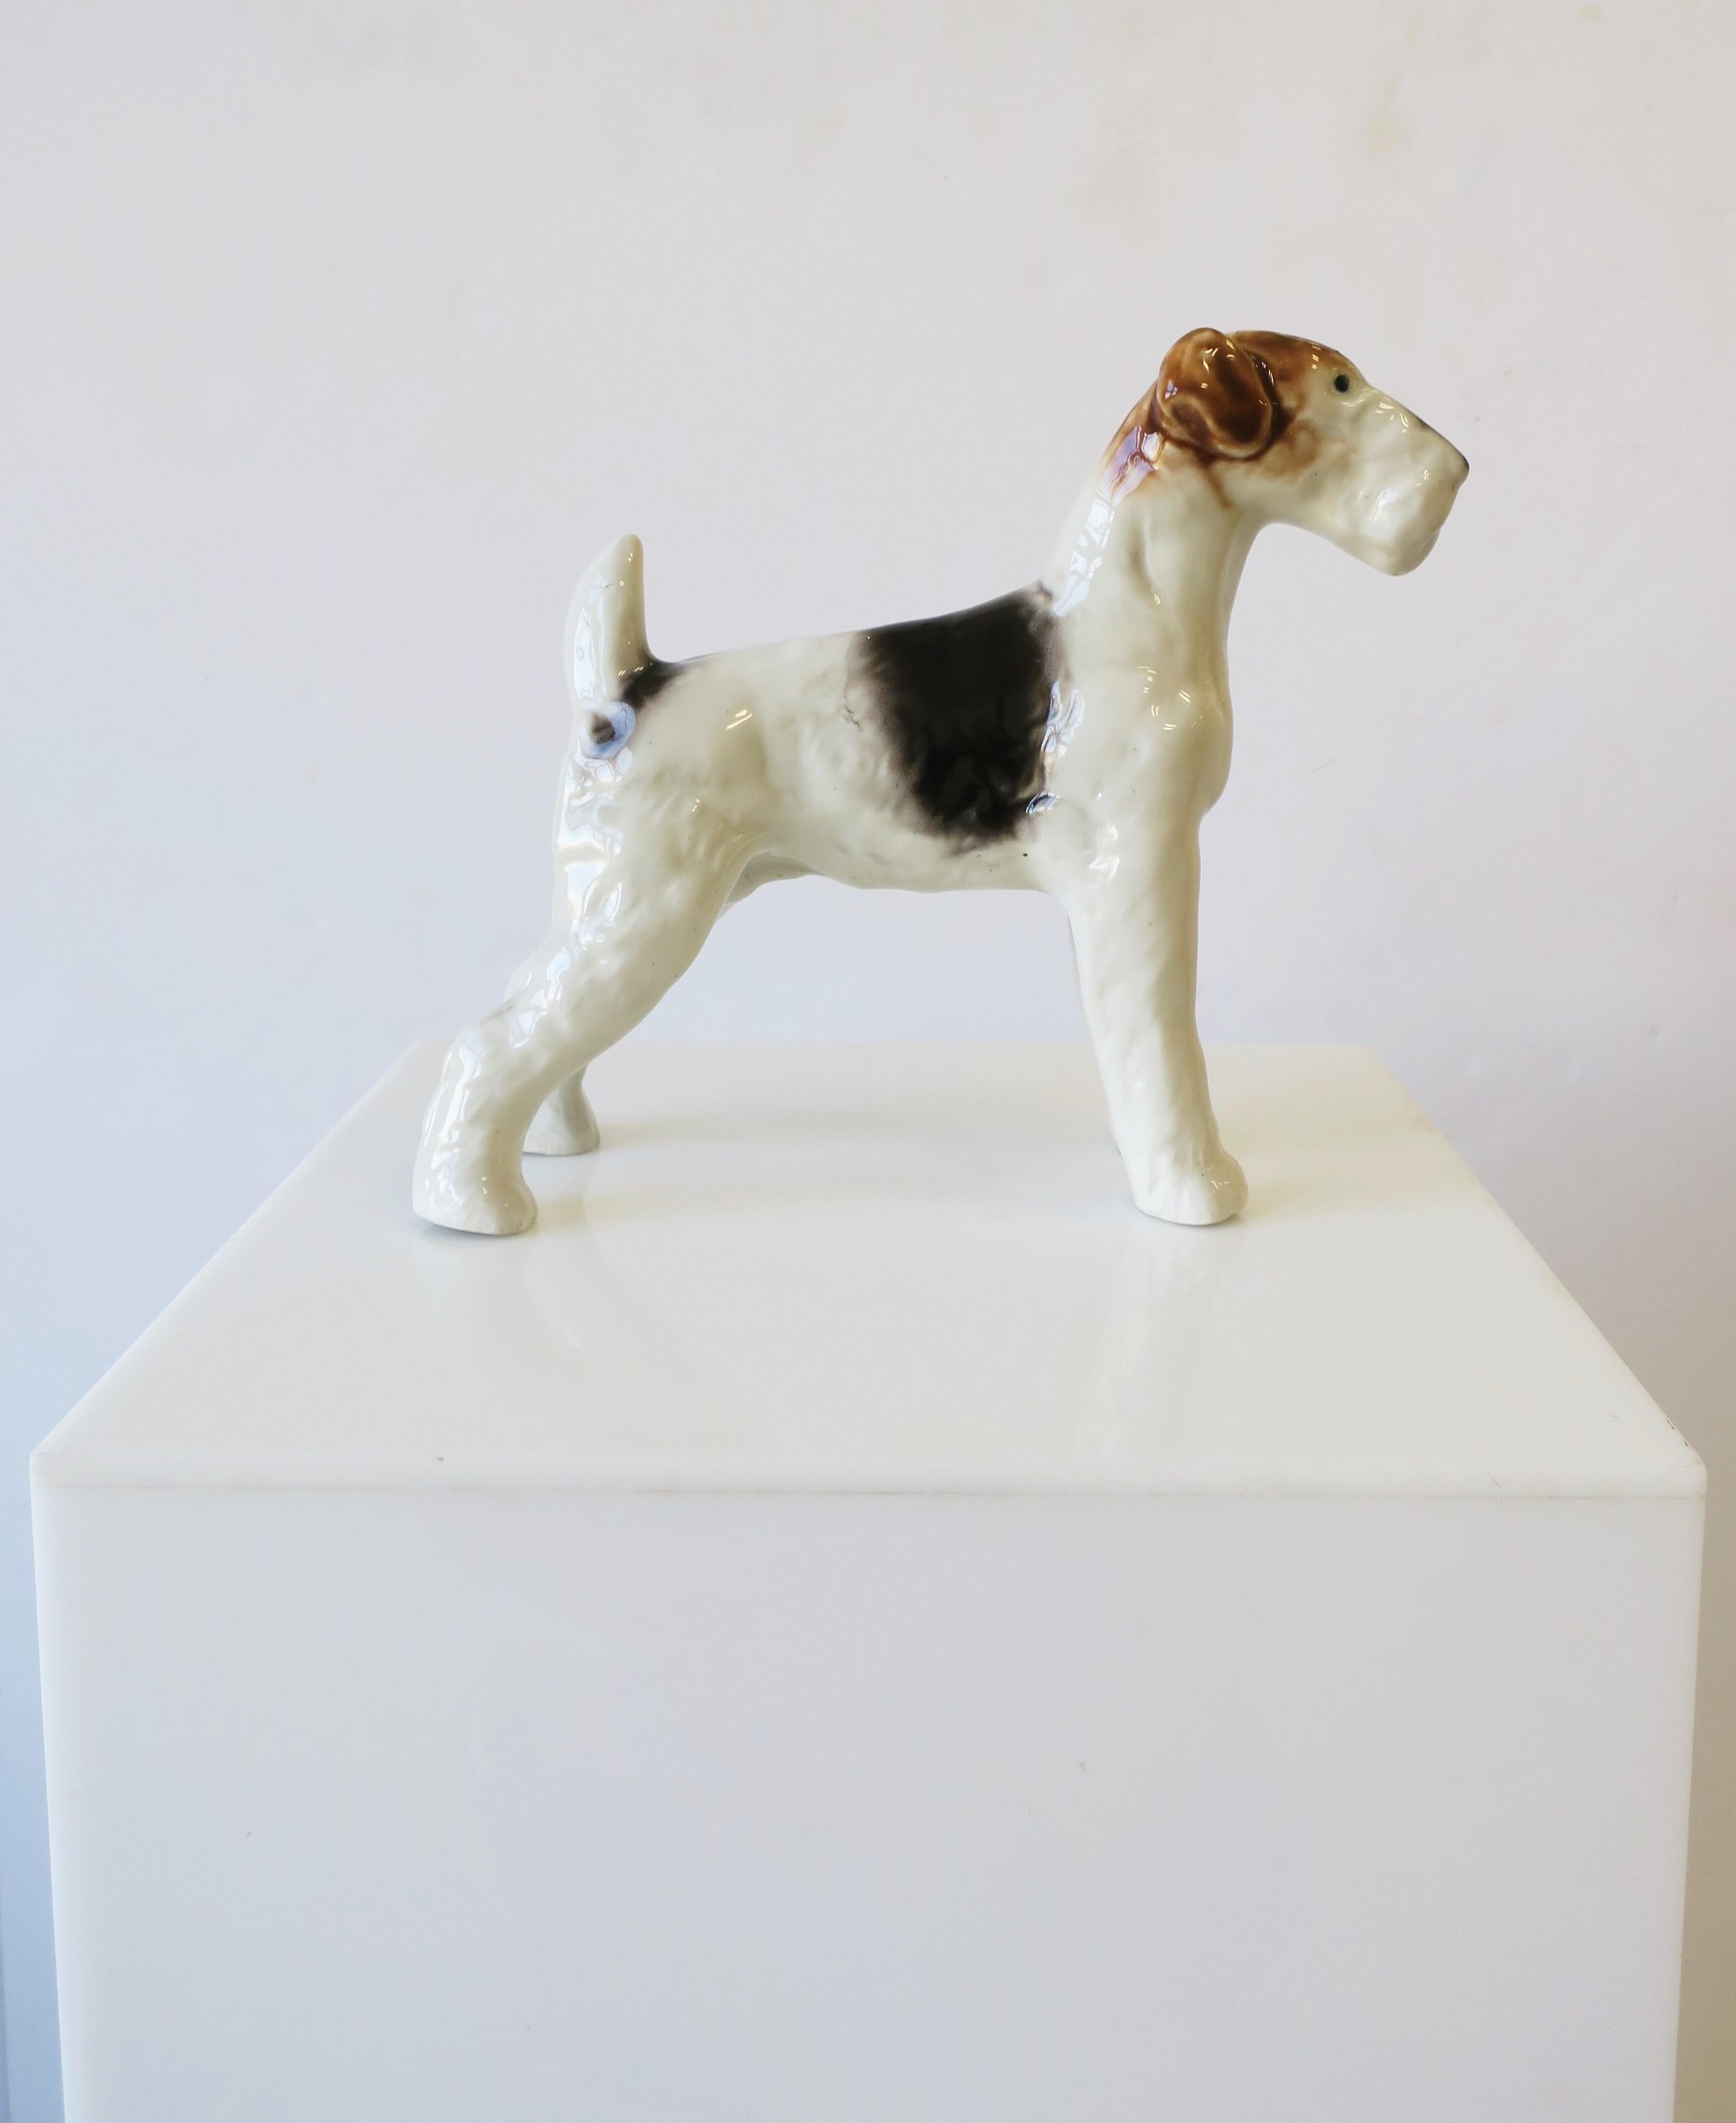 Look at this cutie pie..! Here, a ceramic glazed Wire Fox Terrier dog sculpture piece decorative object. He/She is a nice size measuring: 4